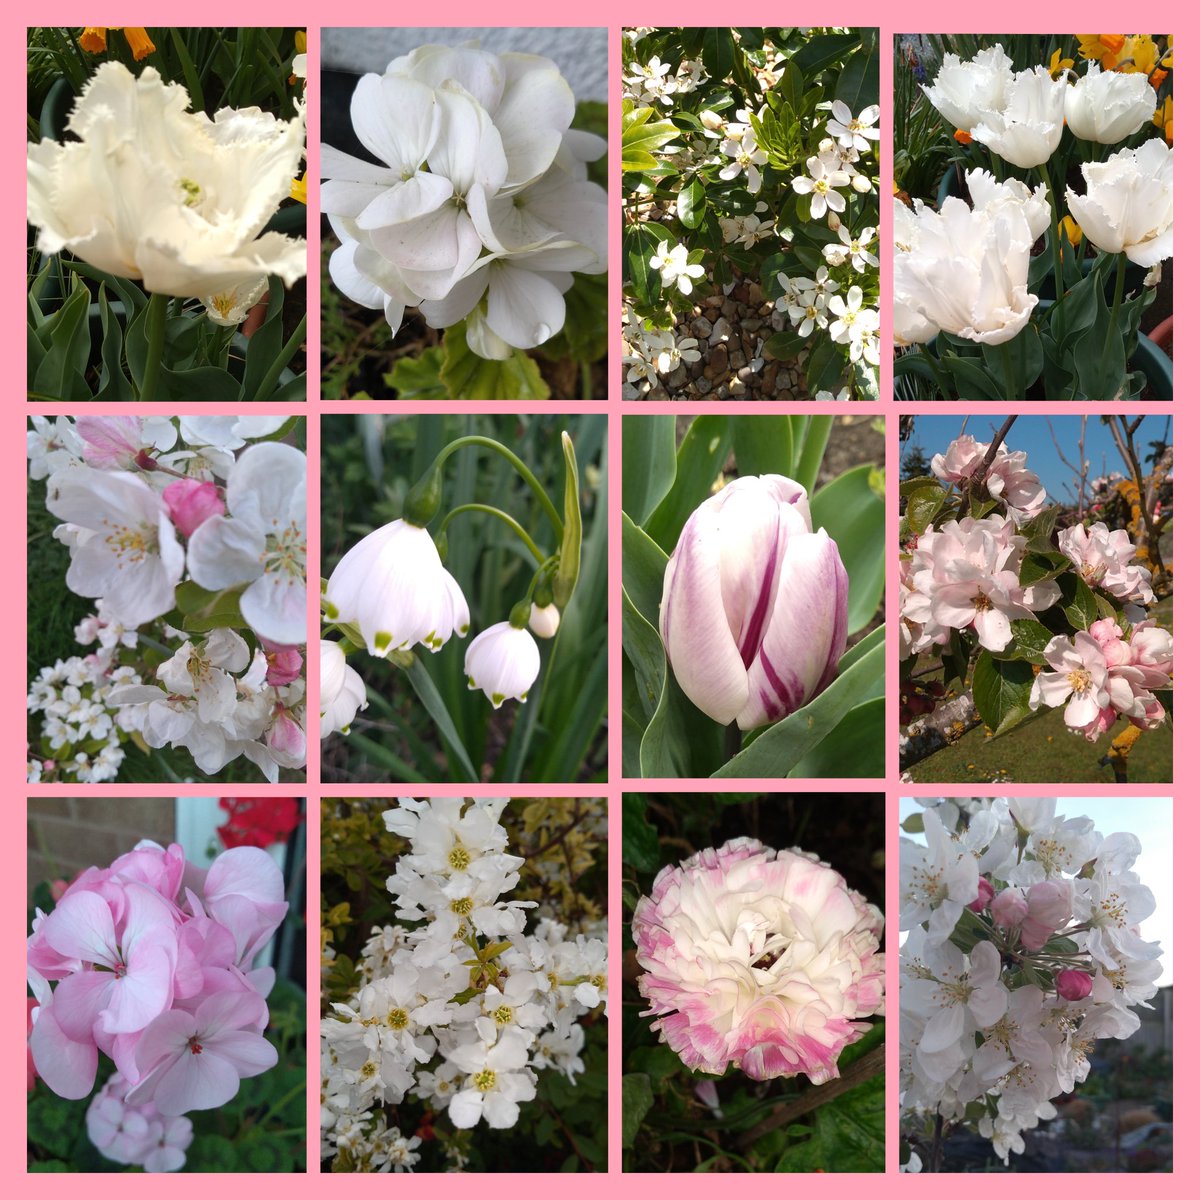 #flowersonfriday 
White and pastel colours to celebrate #sauvignonblancday  🥂 
Have a wonderful Friday everyone.
🌸🤍🌸🤍🌸🤍🌸🤍🌸🤍🌸🤍